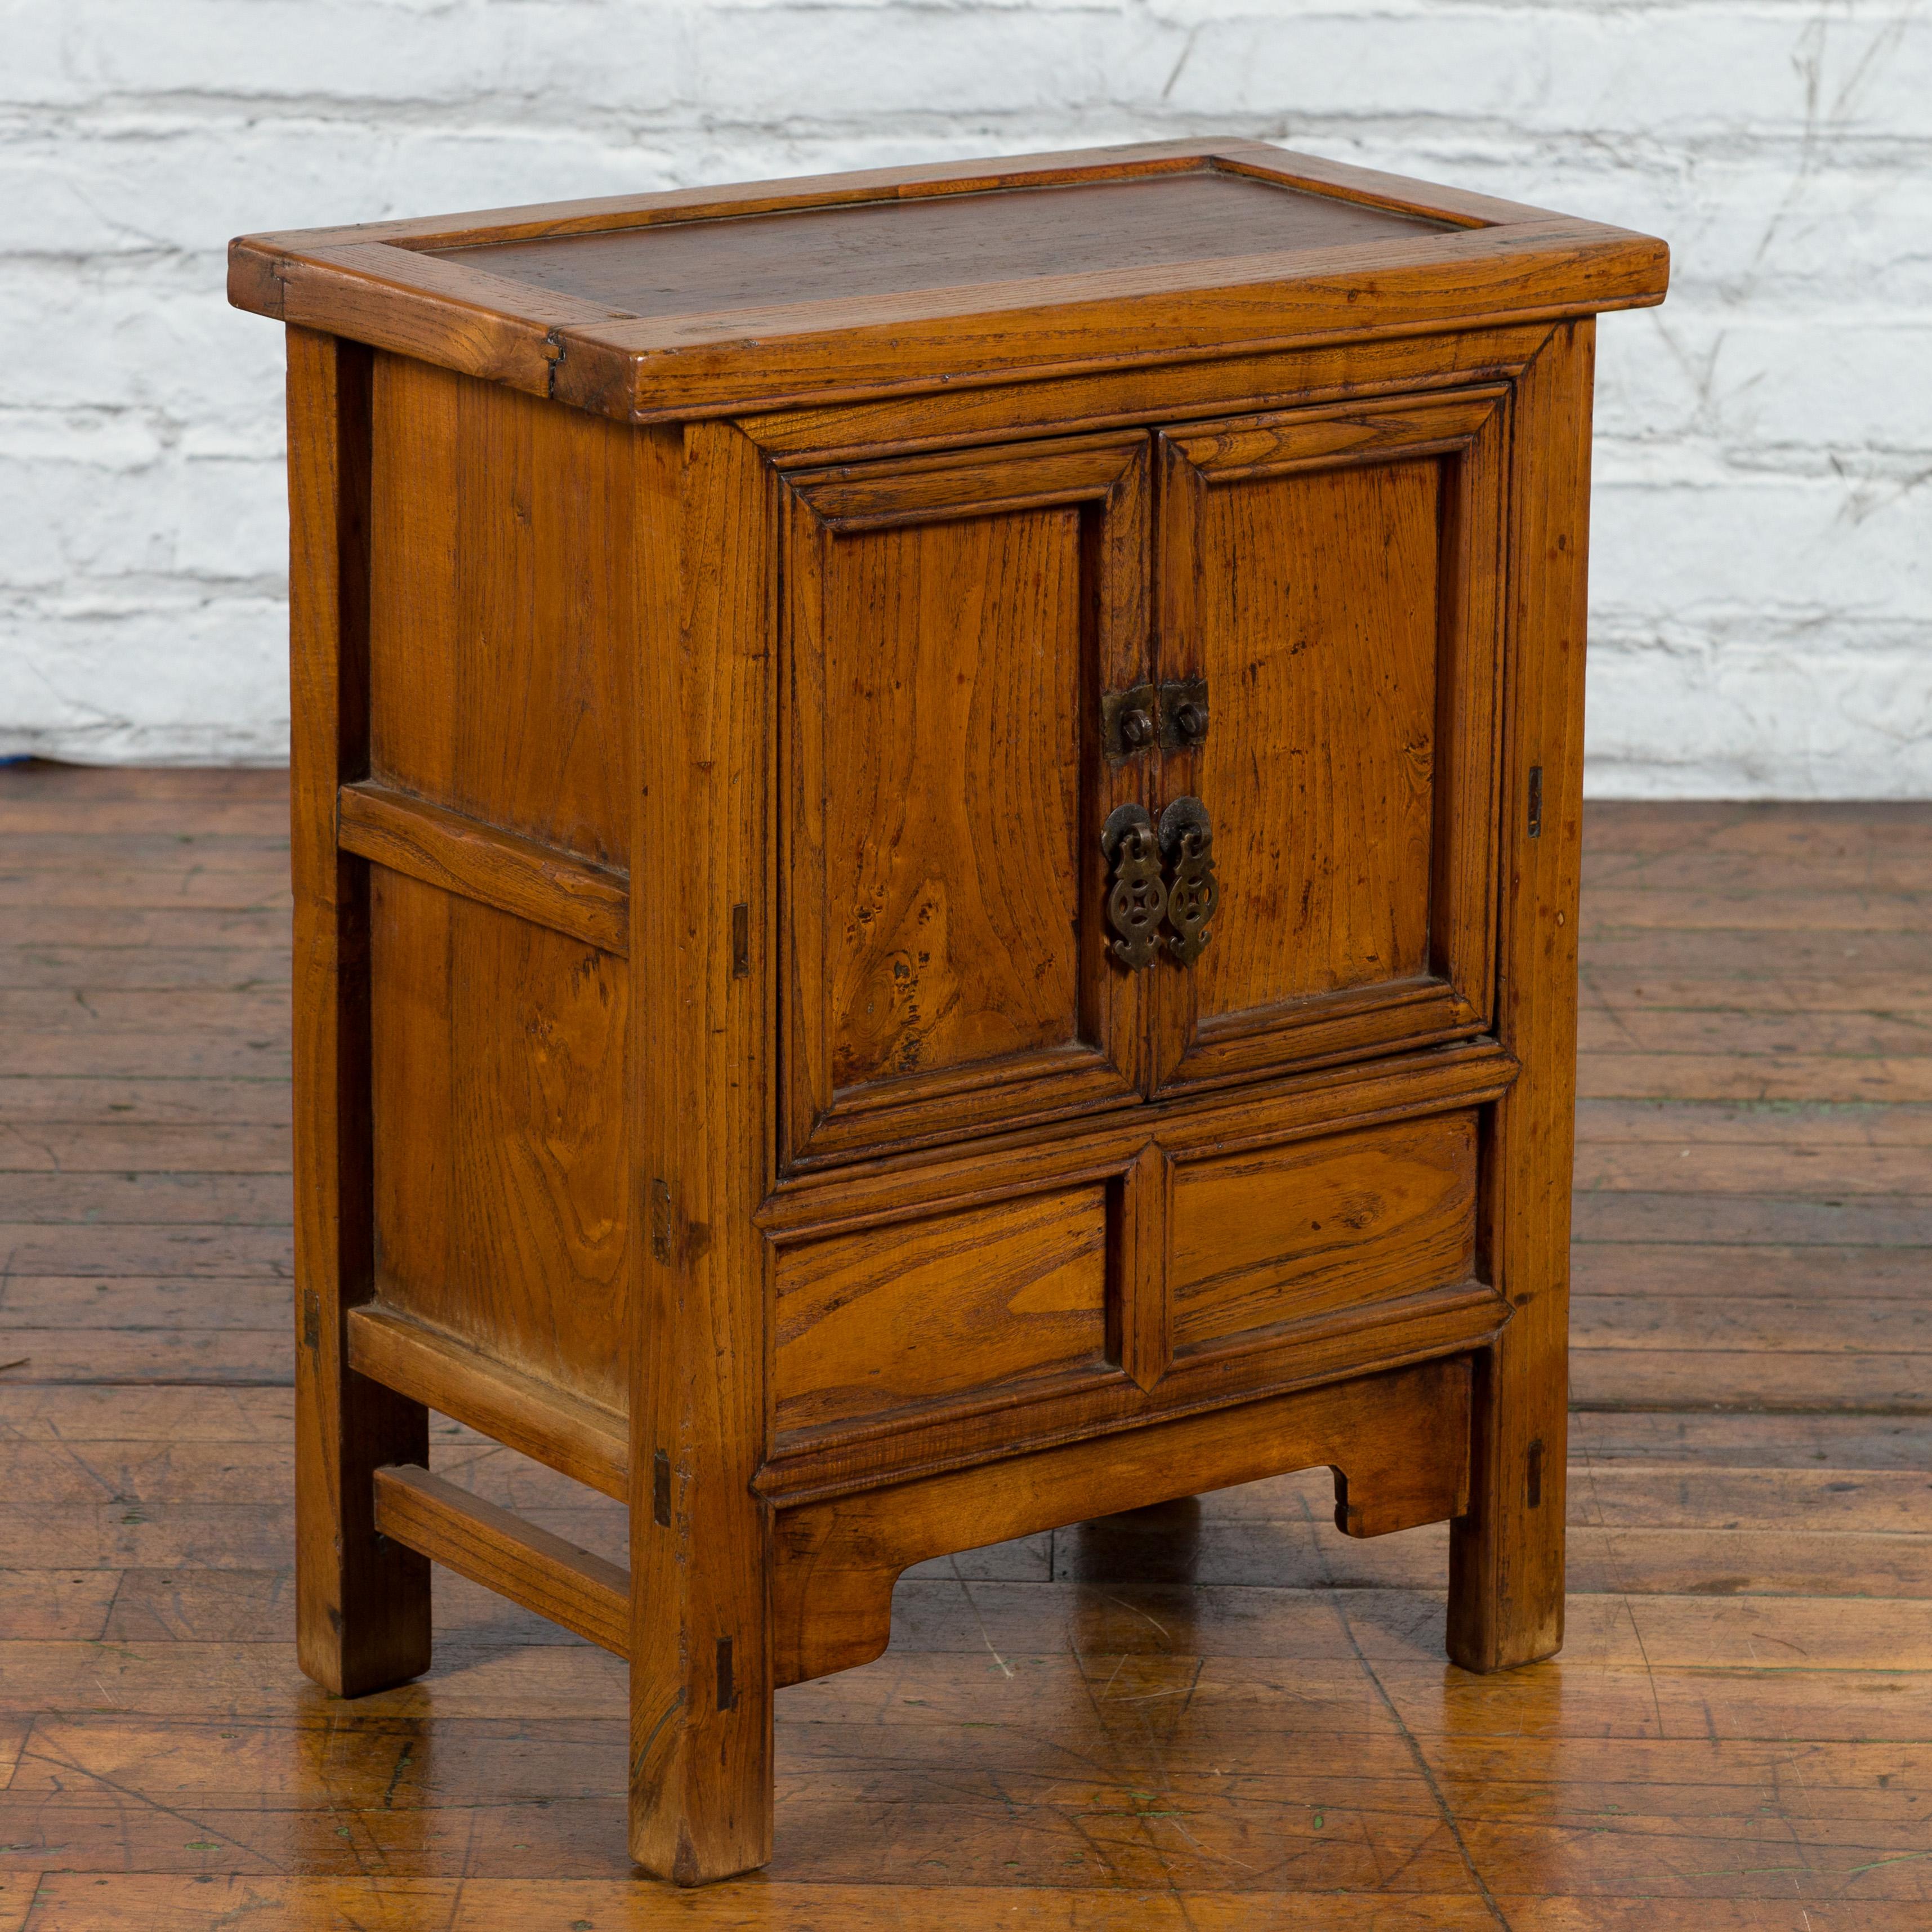 20th Century Chinese Late Qing Dynasty Period Bedside Wooden Cabinet with Two Small Doors For Sale